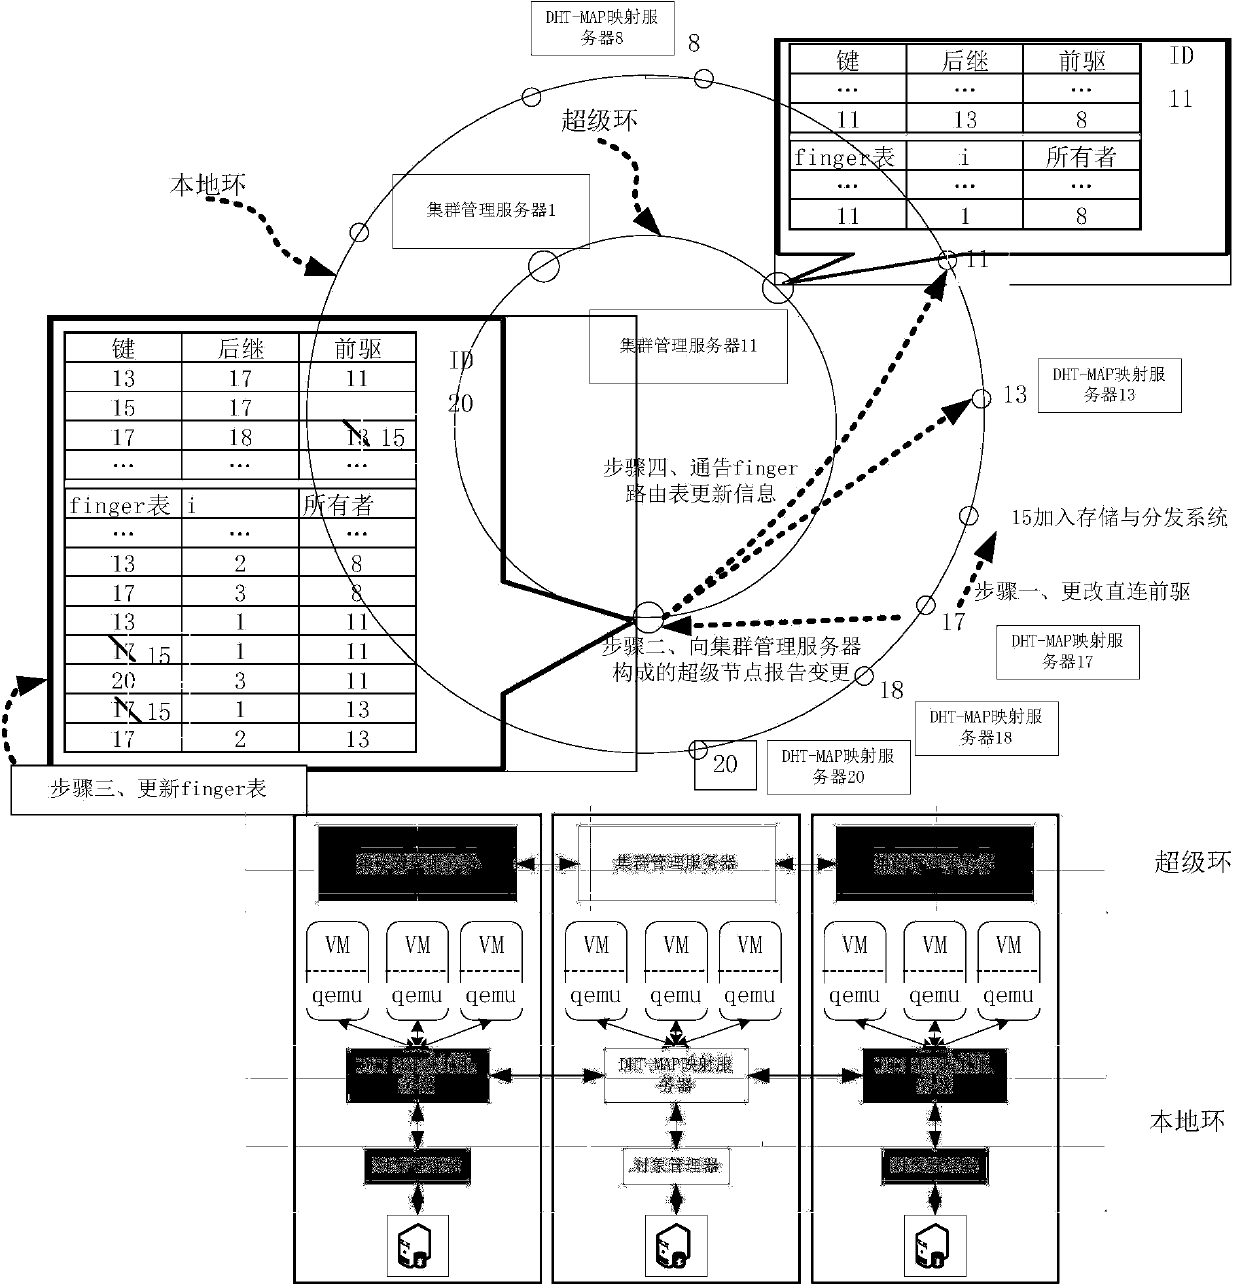 Mirror image storage and distribution system for virtual machines